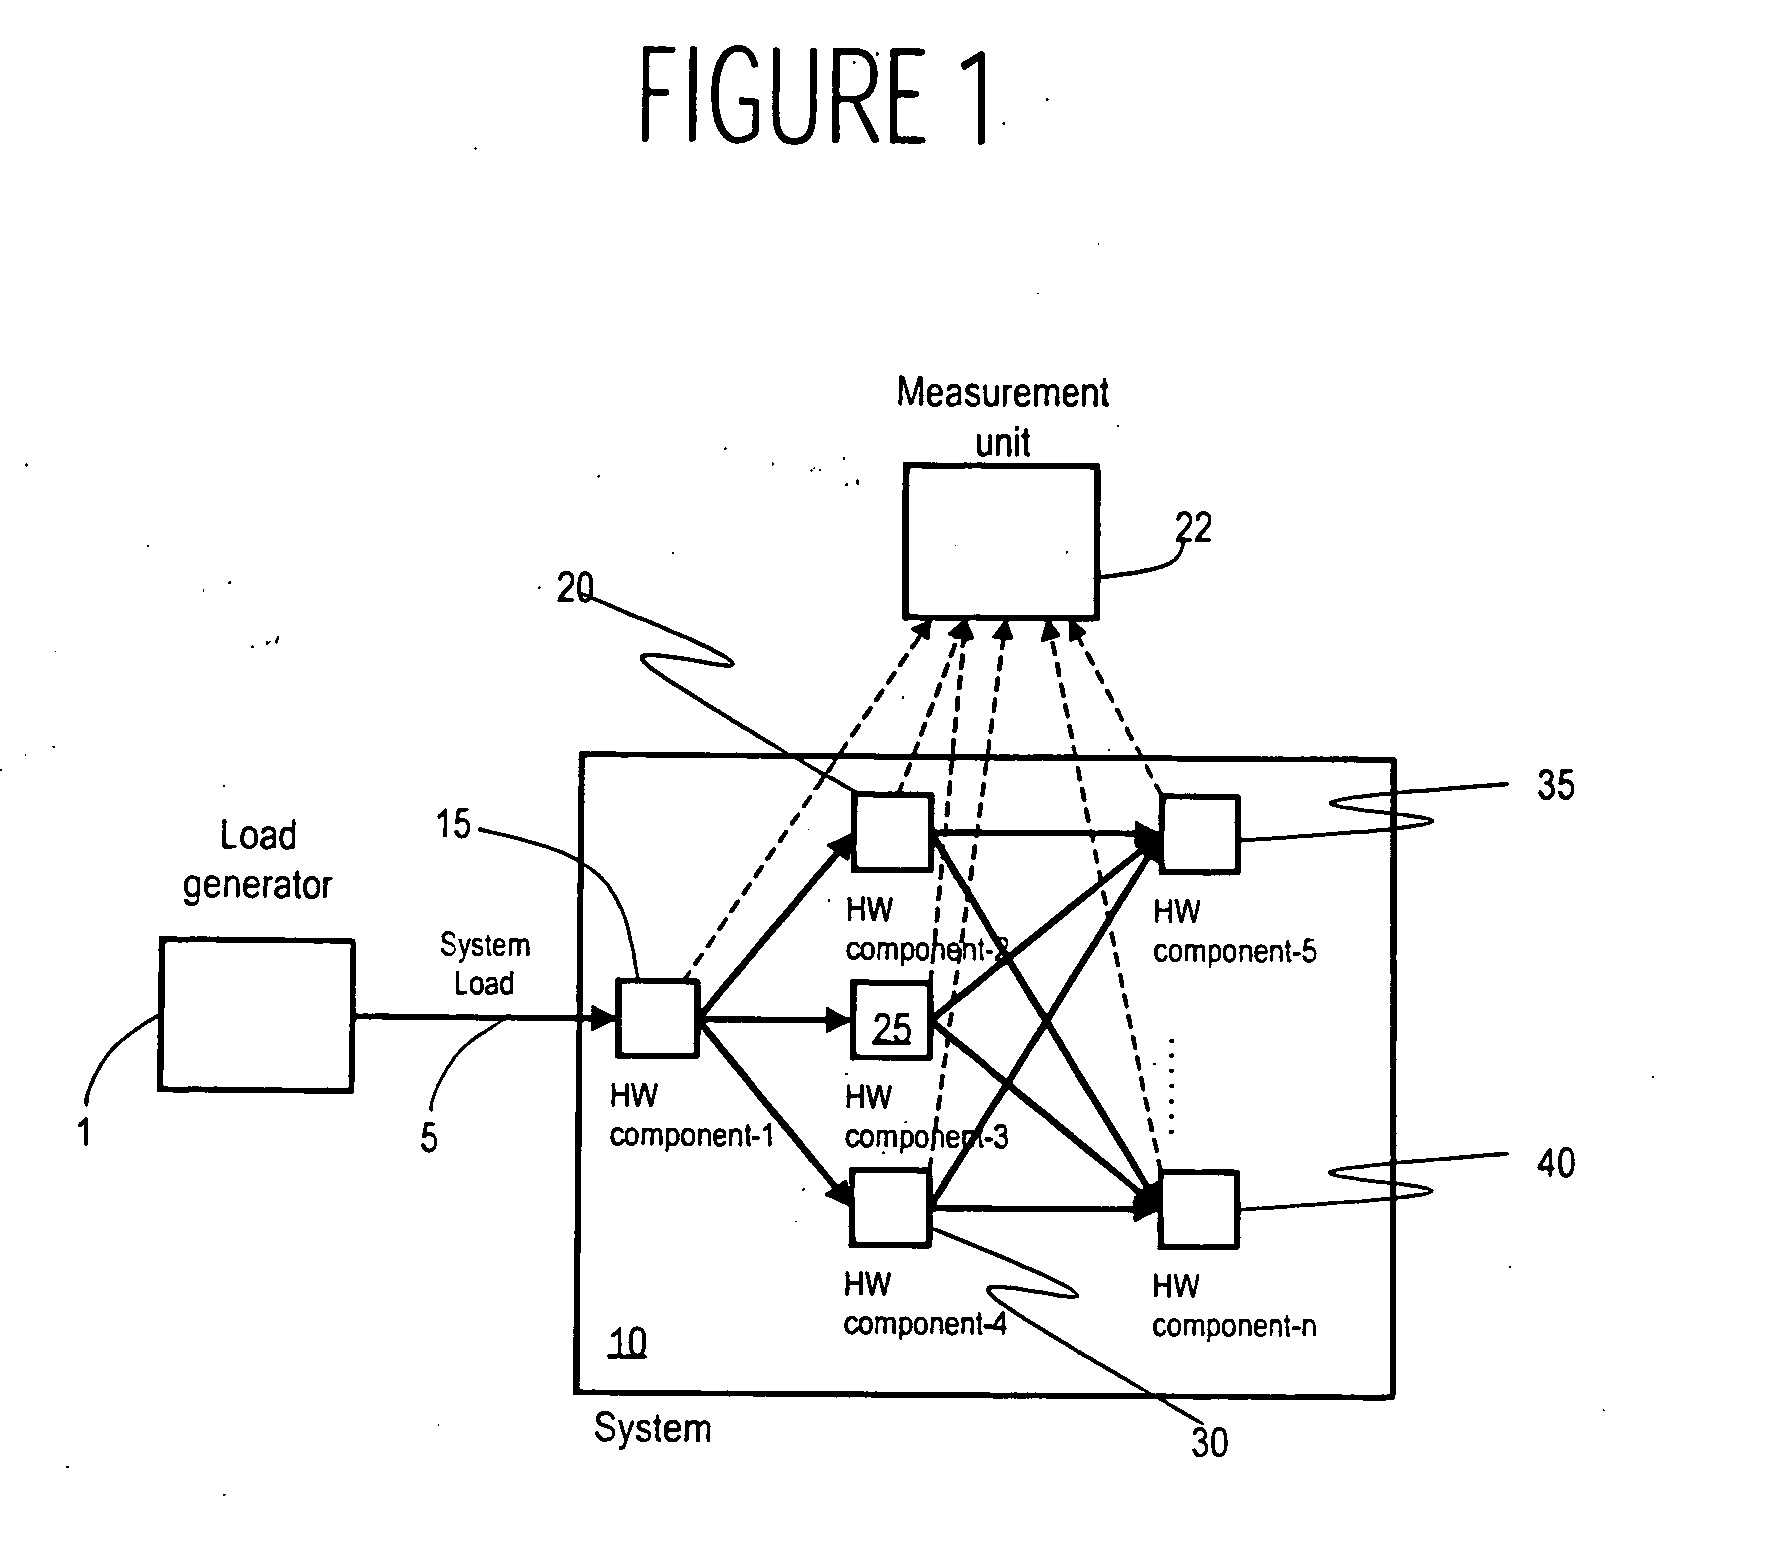 System for estimating processing requirements